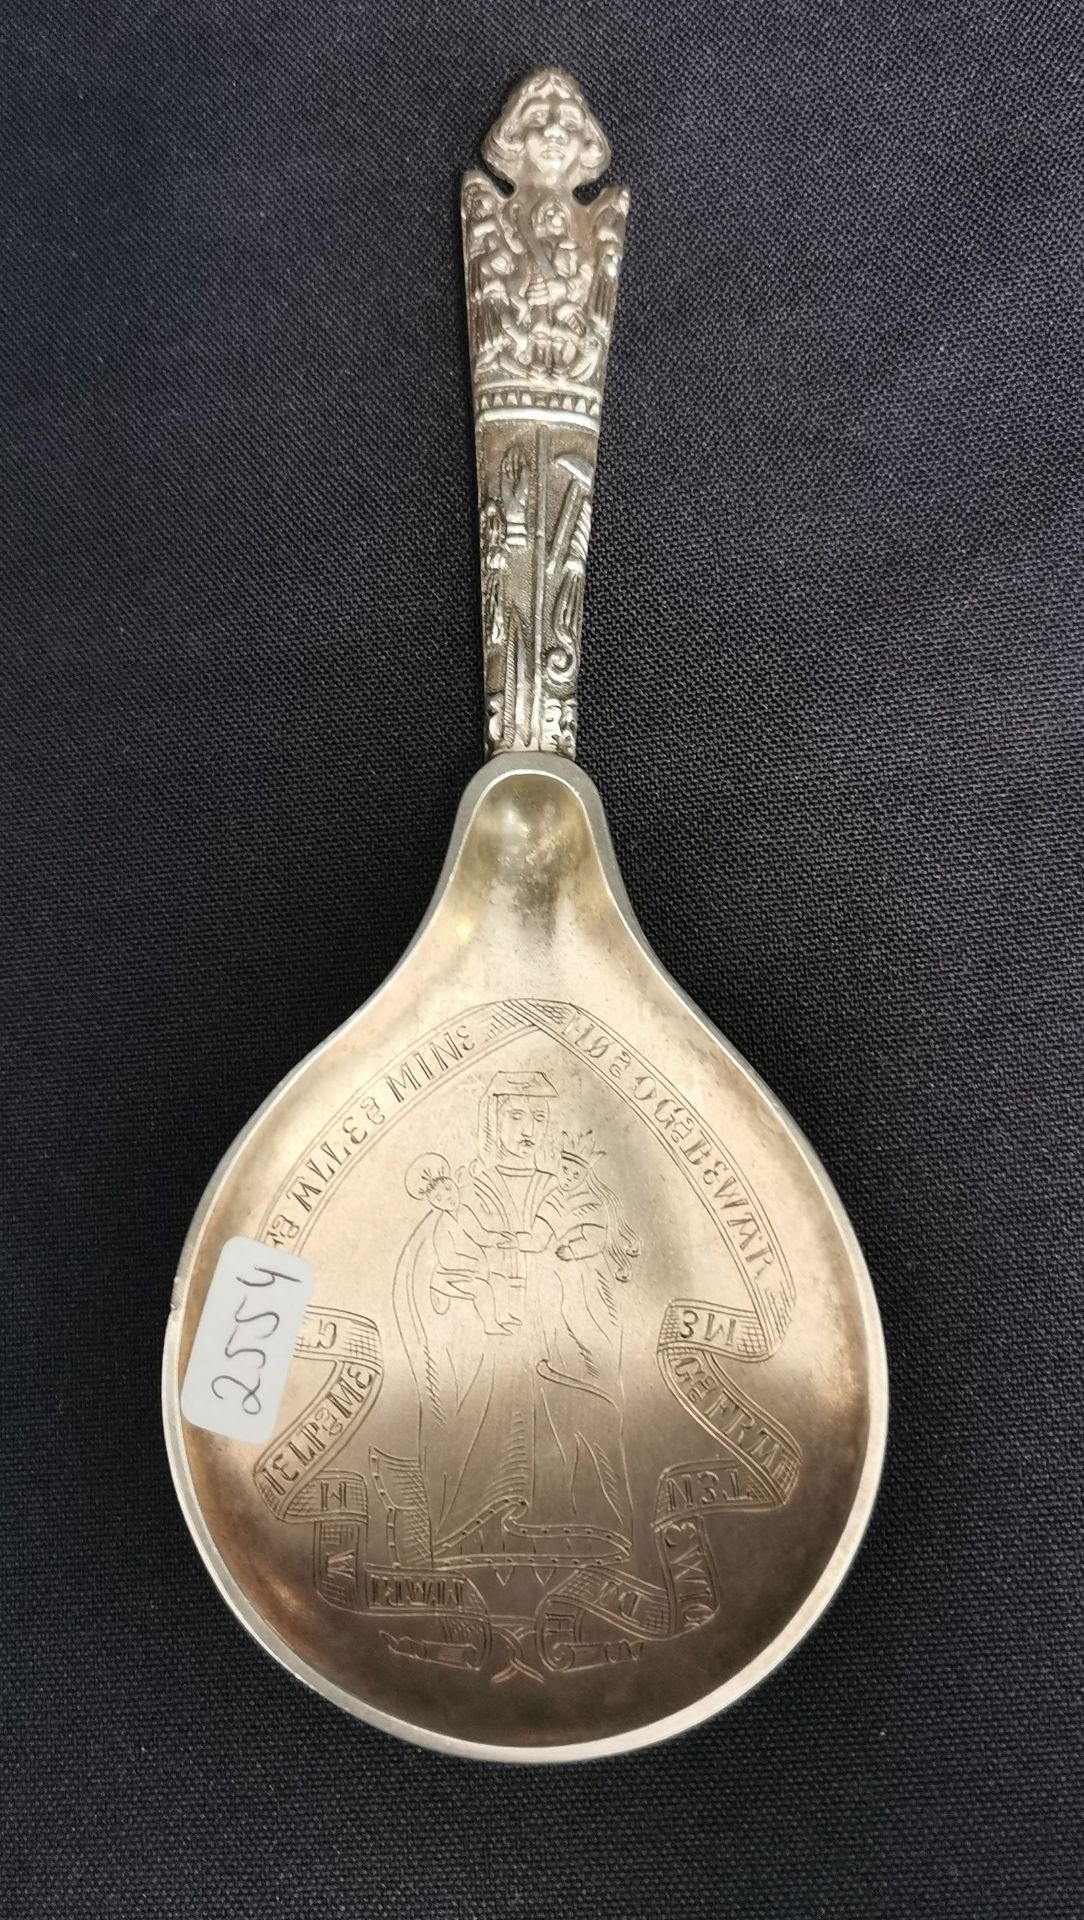 DANISH SERVING SPOON OF HISTORICISM WITH SACRED MOTIFS - Image 3 of 3